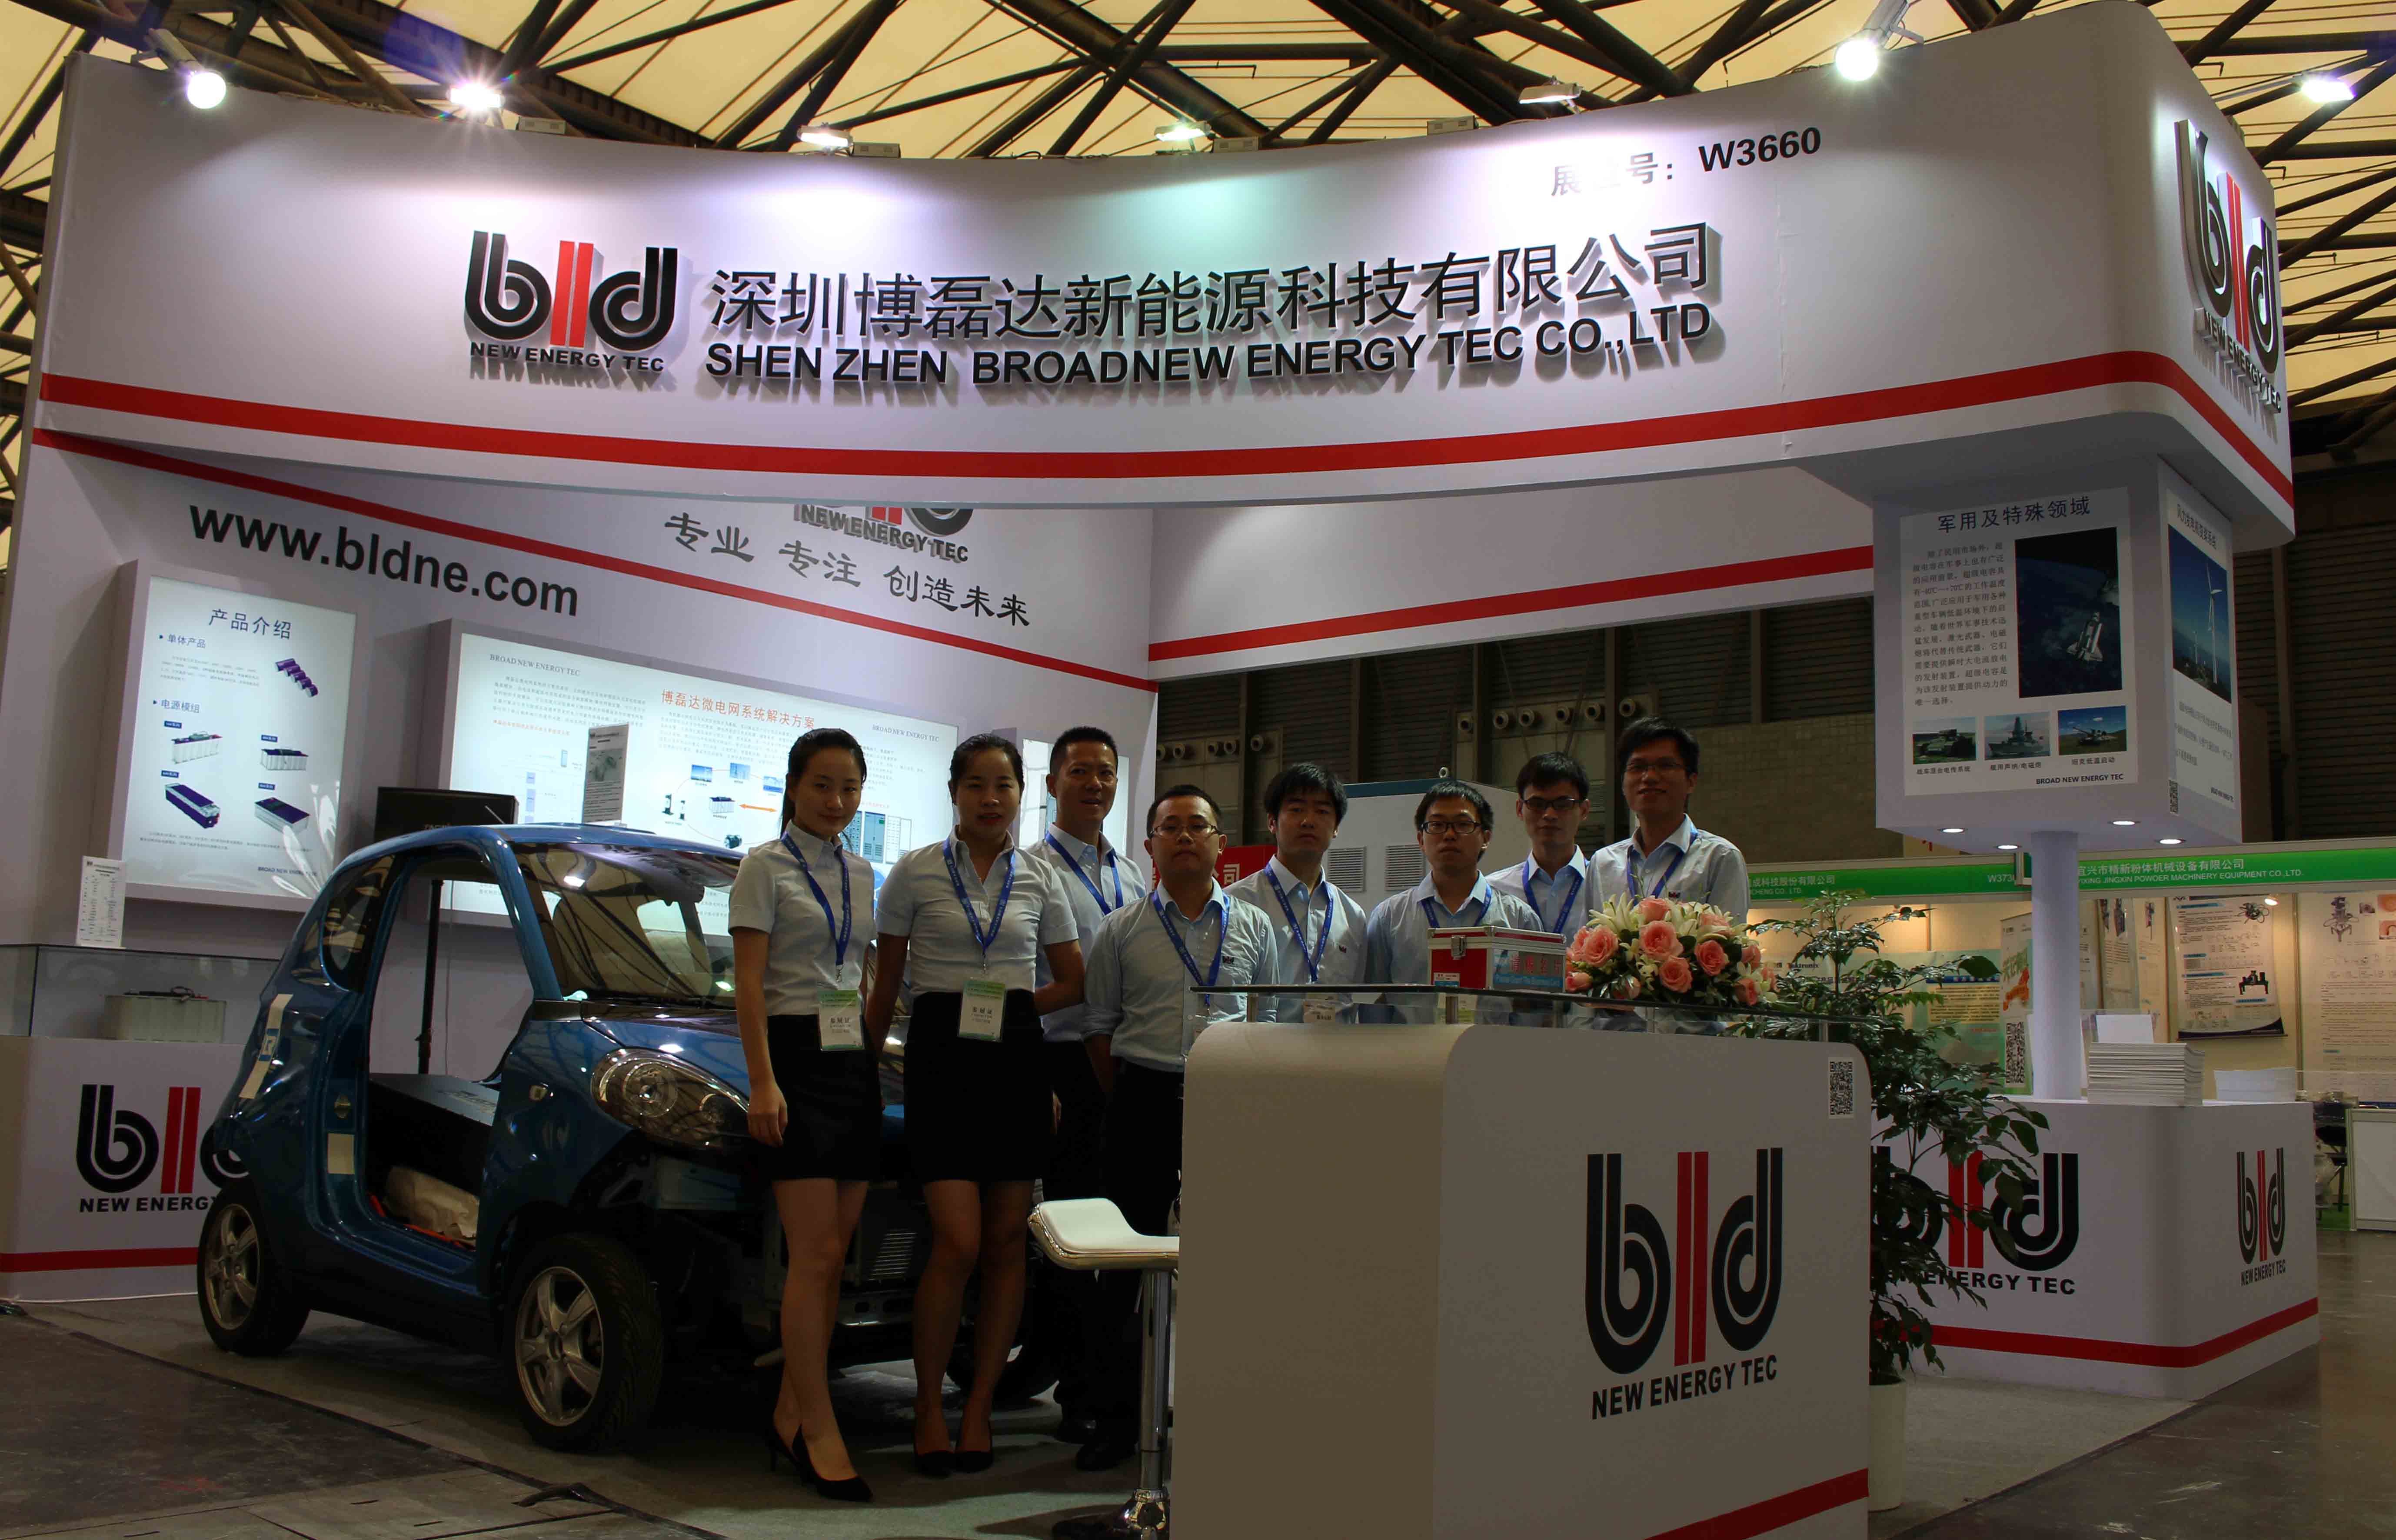 BLD - Industry Pioneer in super capacitor